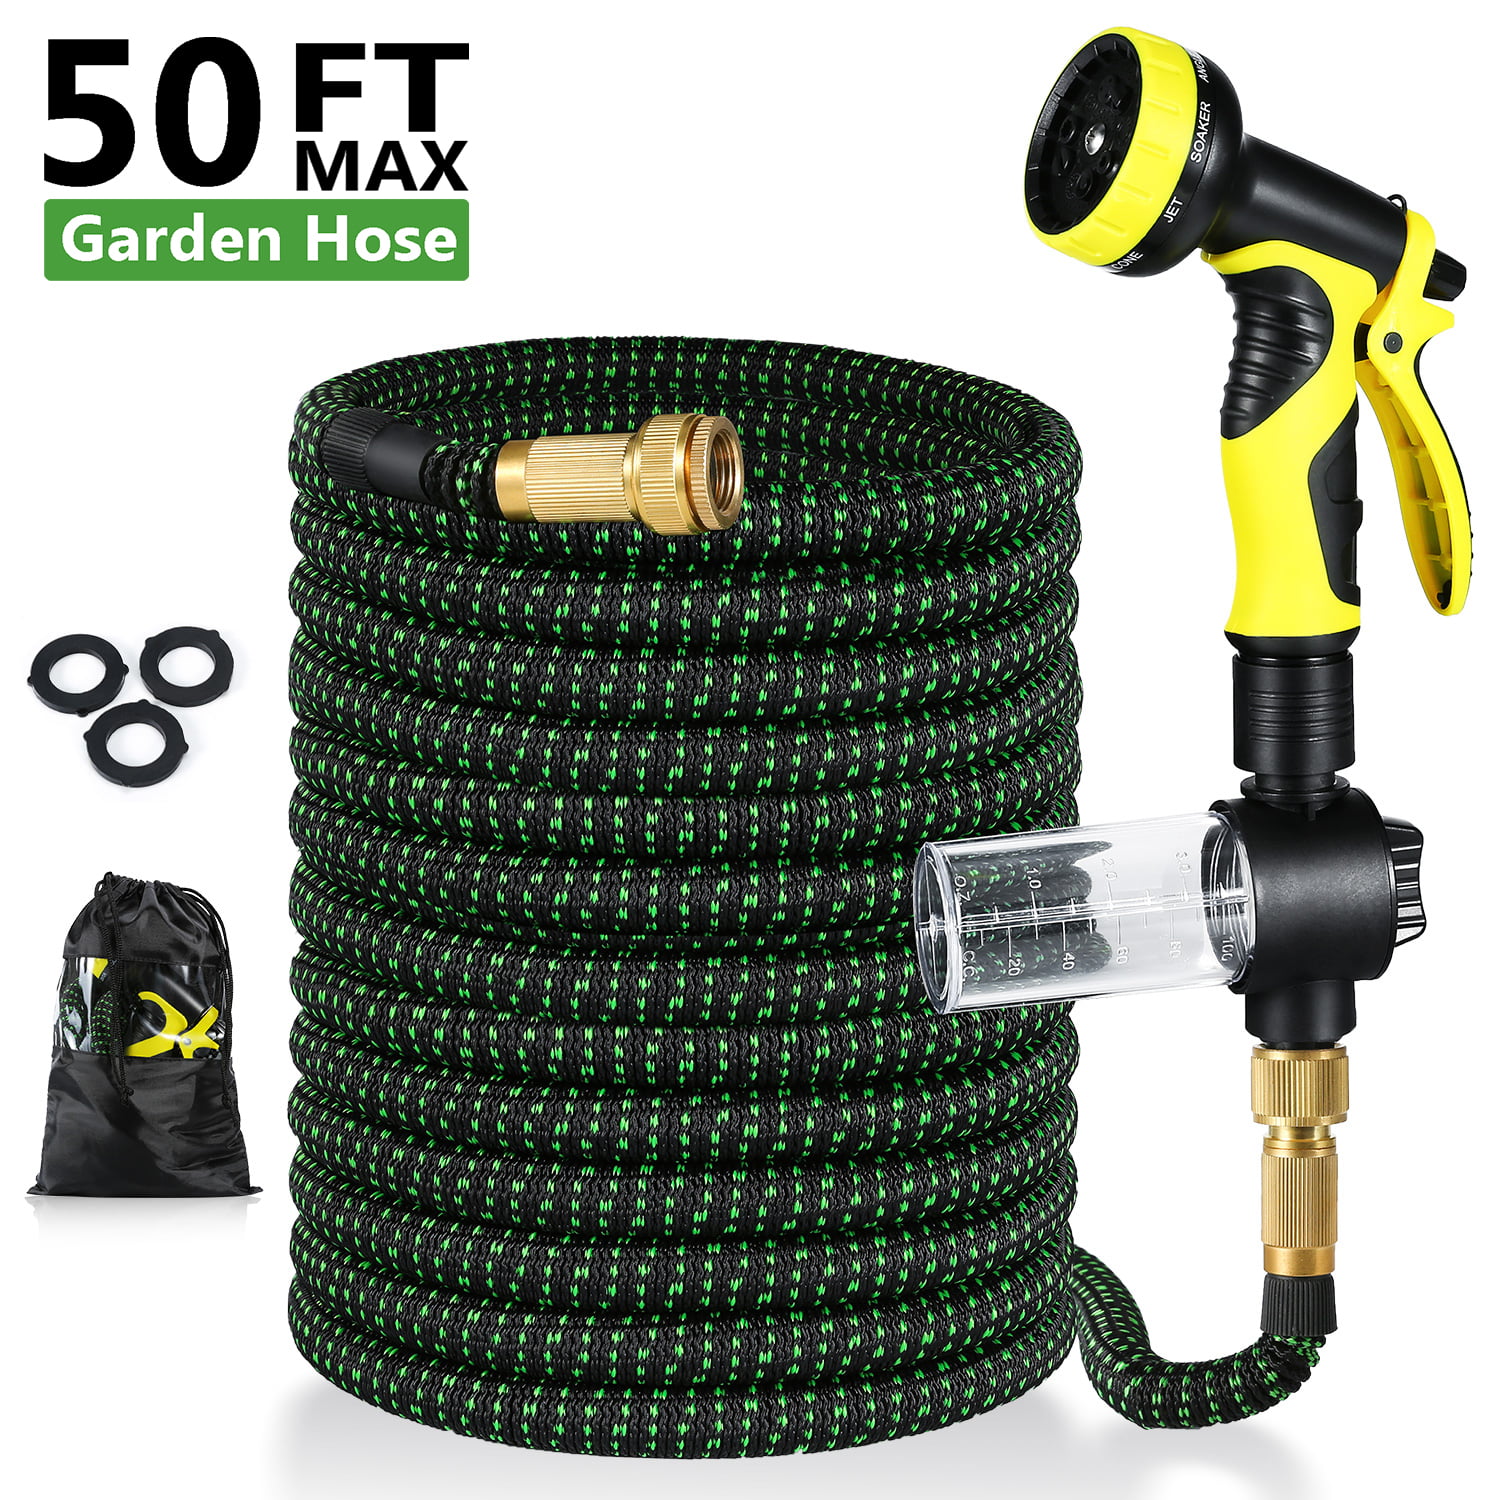 50/100/150FT Flexible Garden Hose Expandable Lightweight Heavy Duty With Nozzle 